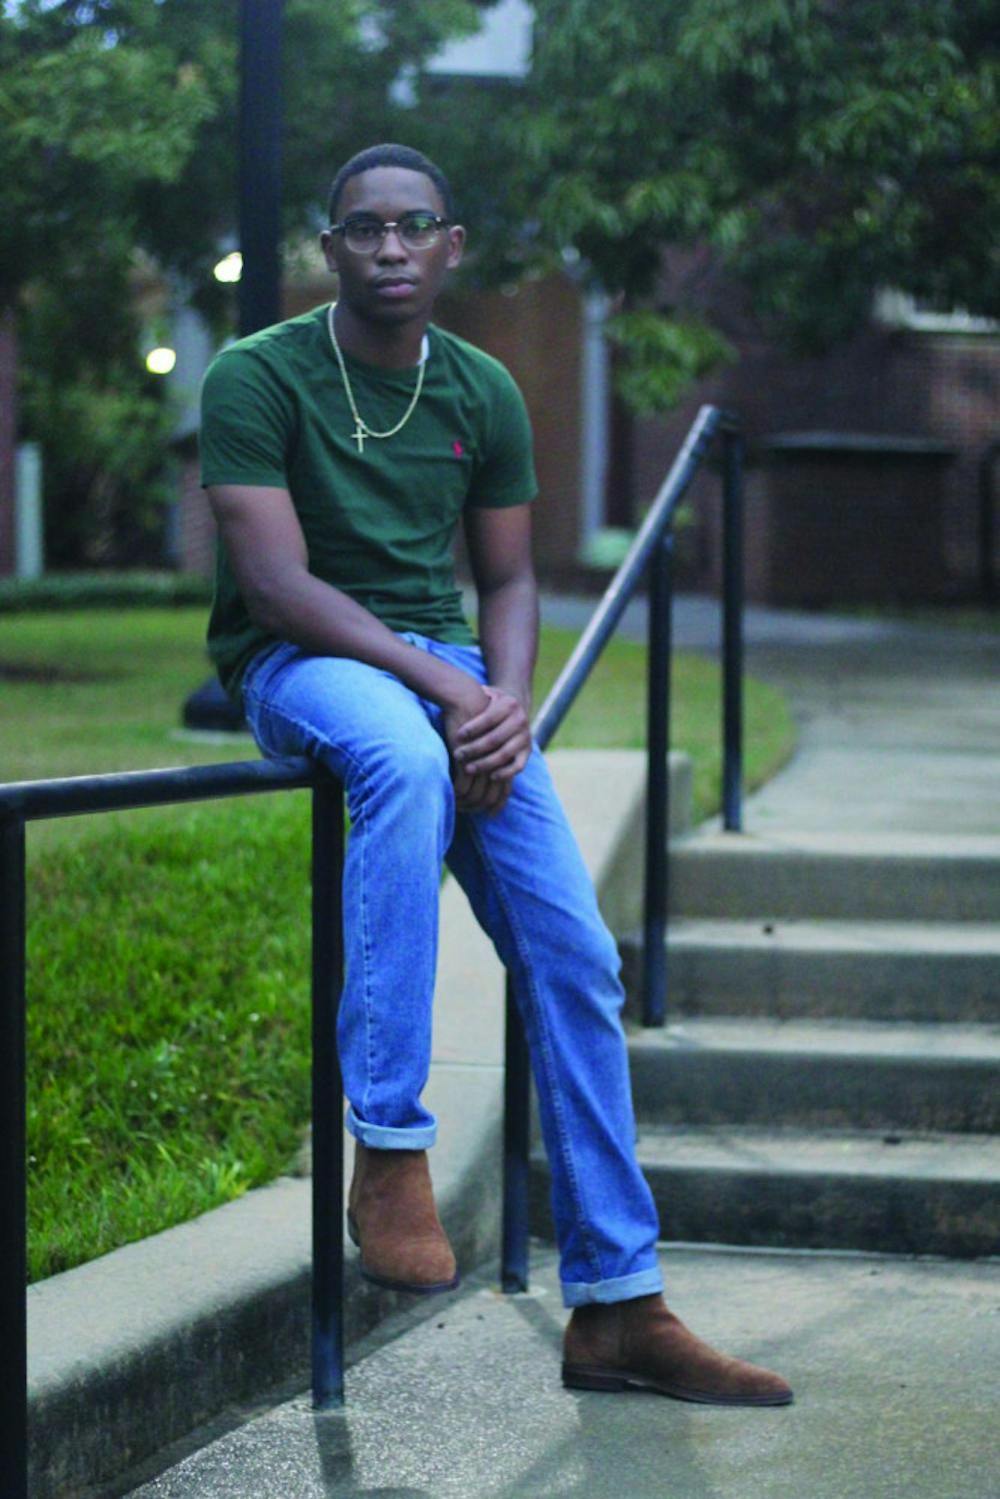 Joshua Lymon poses for a photo on campus.